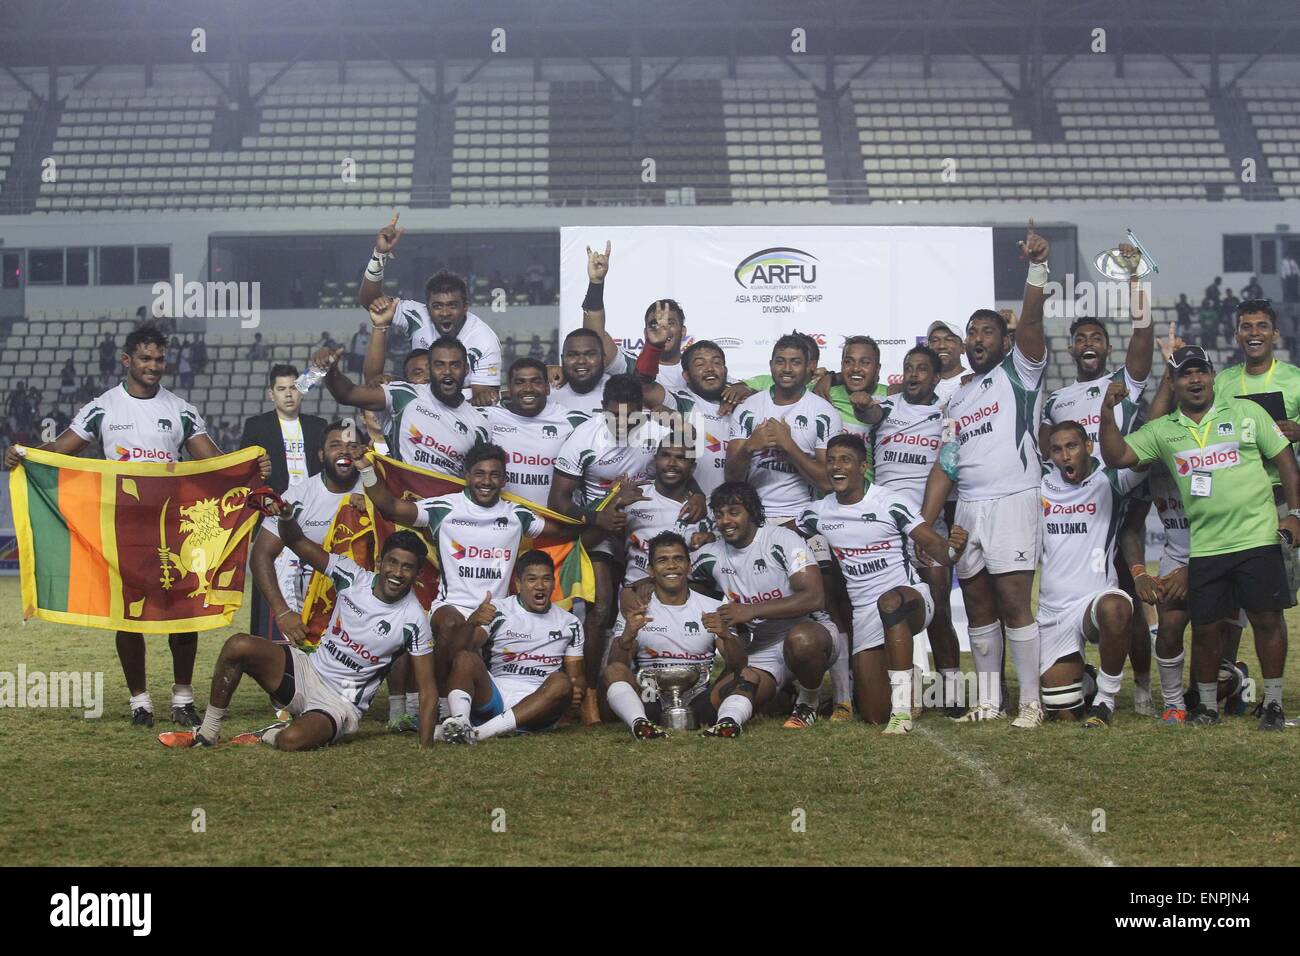 Bulacan, Philippines. 09th May, 2015. The Sri Lanka rugby team are crowned Division 1 rugby champions of the Asian Rugby Championship after defeating the Philippines, 27-14 in the Division 1 finals of the Asian Rugby Championship at the Philippine Sports Stadium. © Mark Cristino/Pacific Press/Alamy Live News Stock Photo